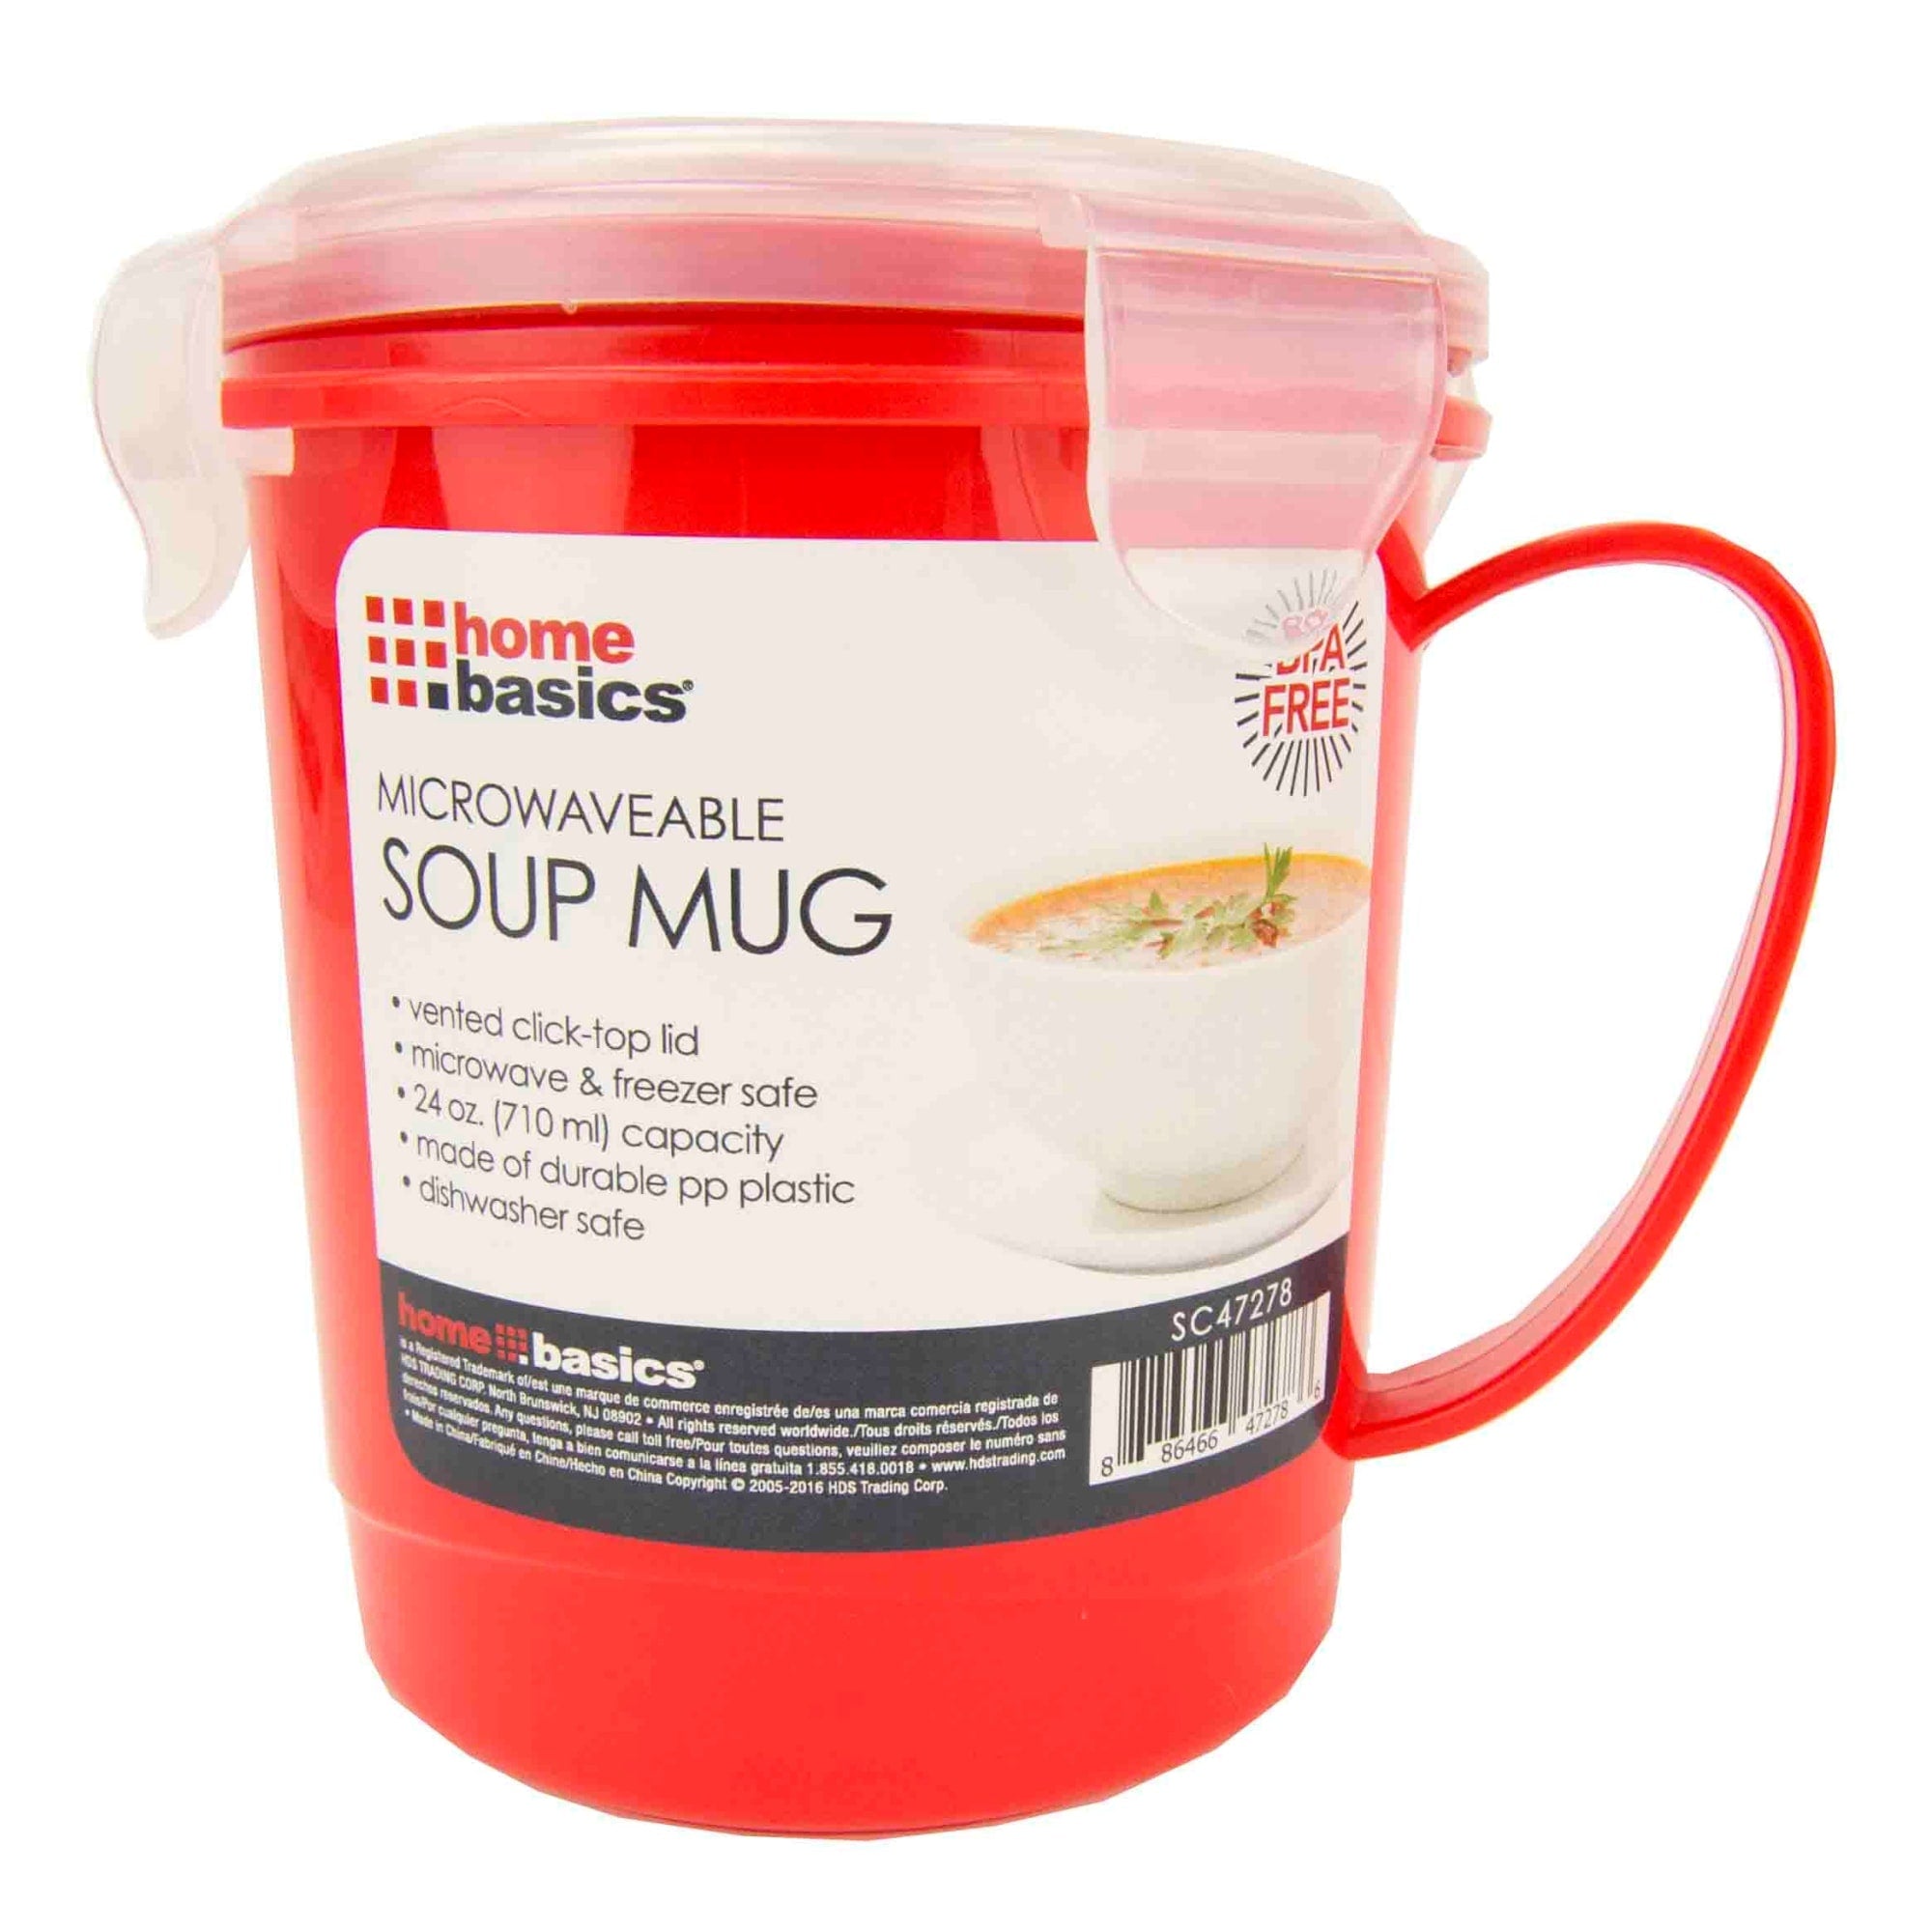 Home Basics 24 oz. Plastic Microwaveable Soup Mug, Red/Clear $2.00 EACH, CASE PACK OF 24